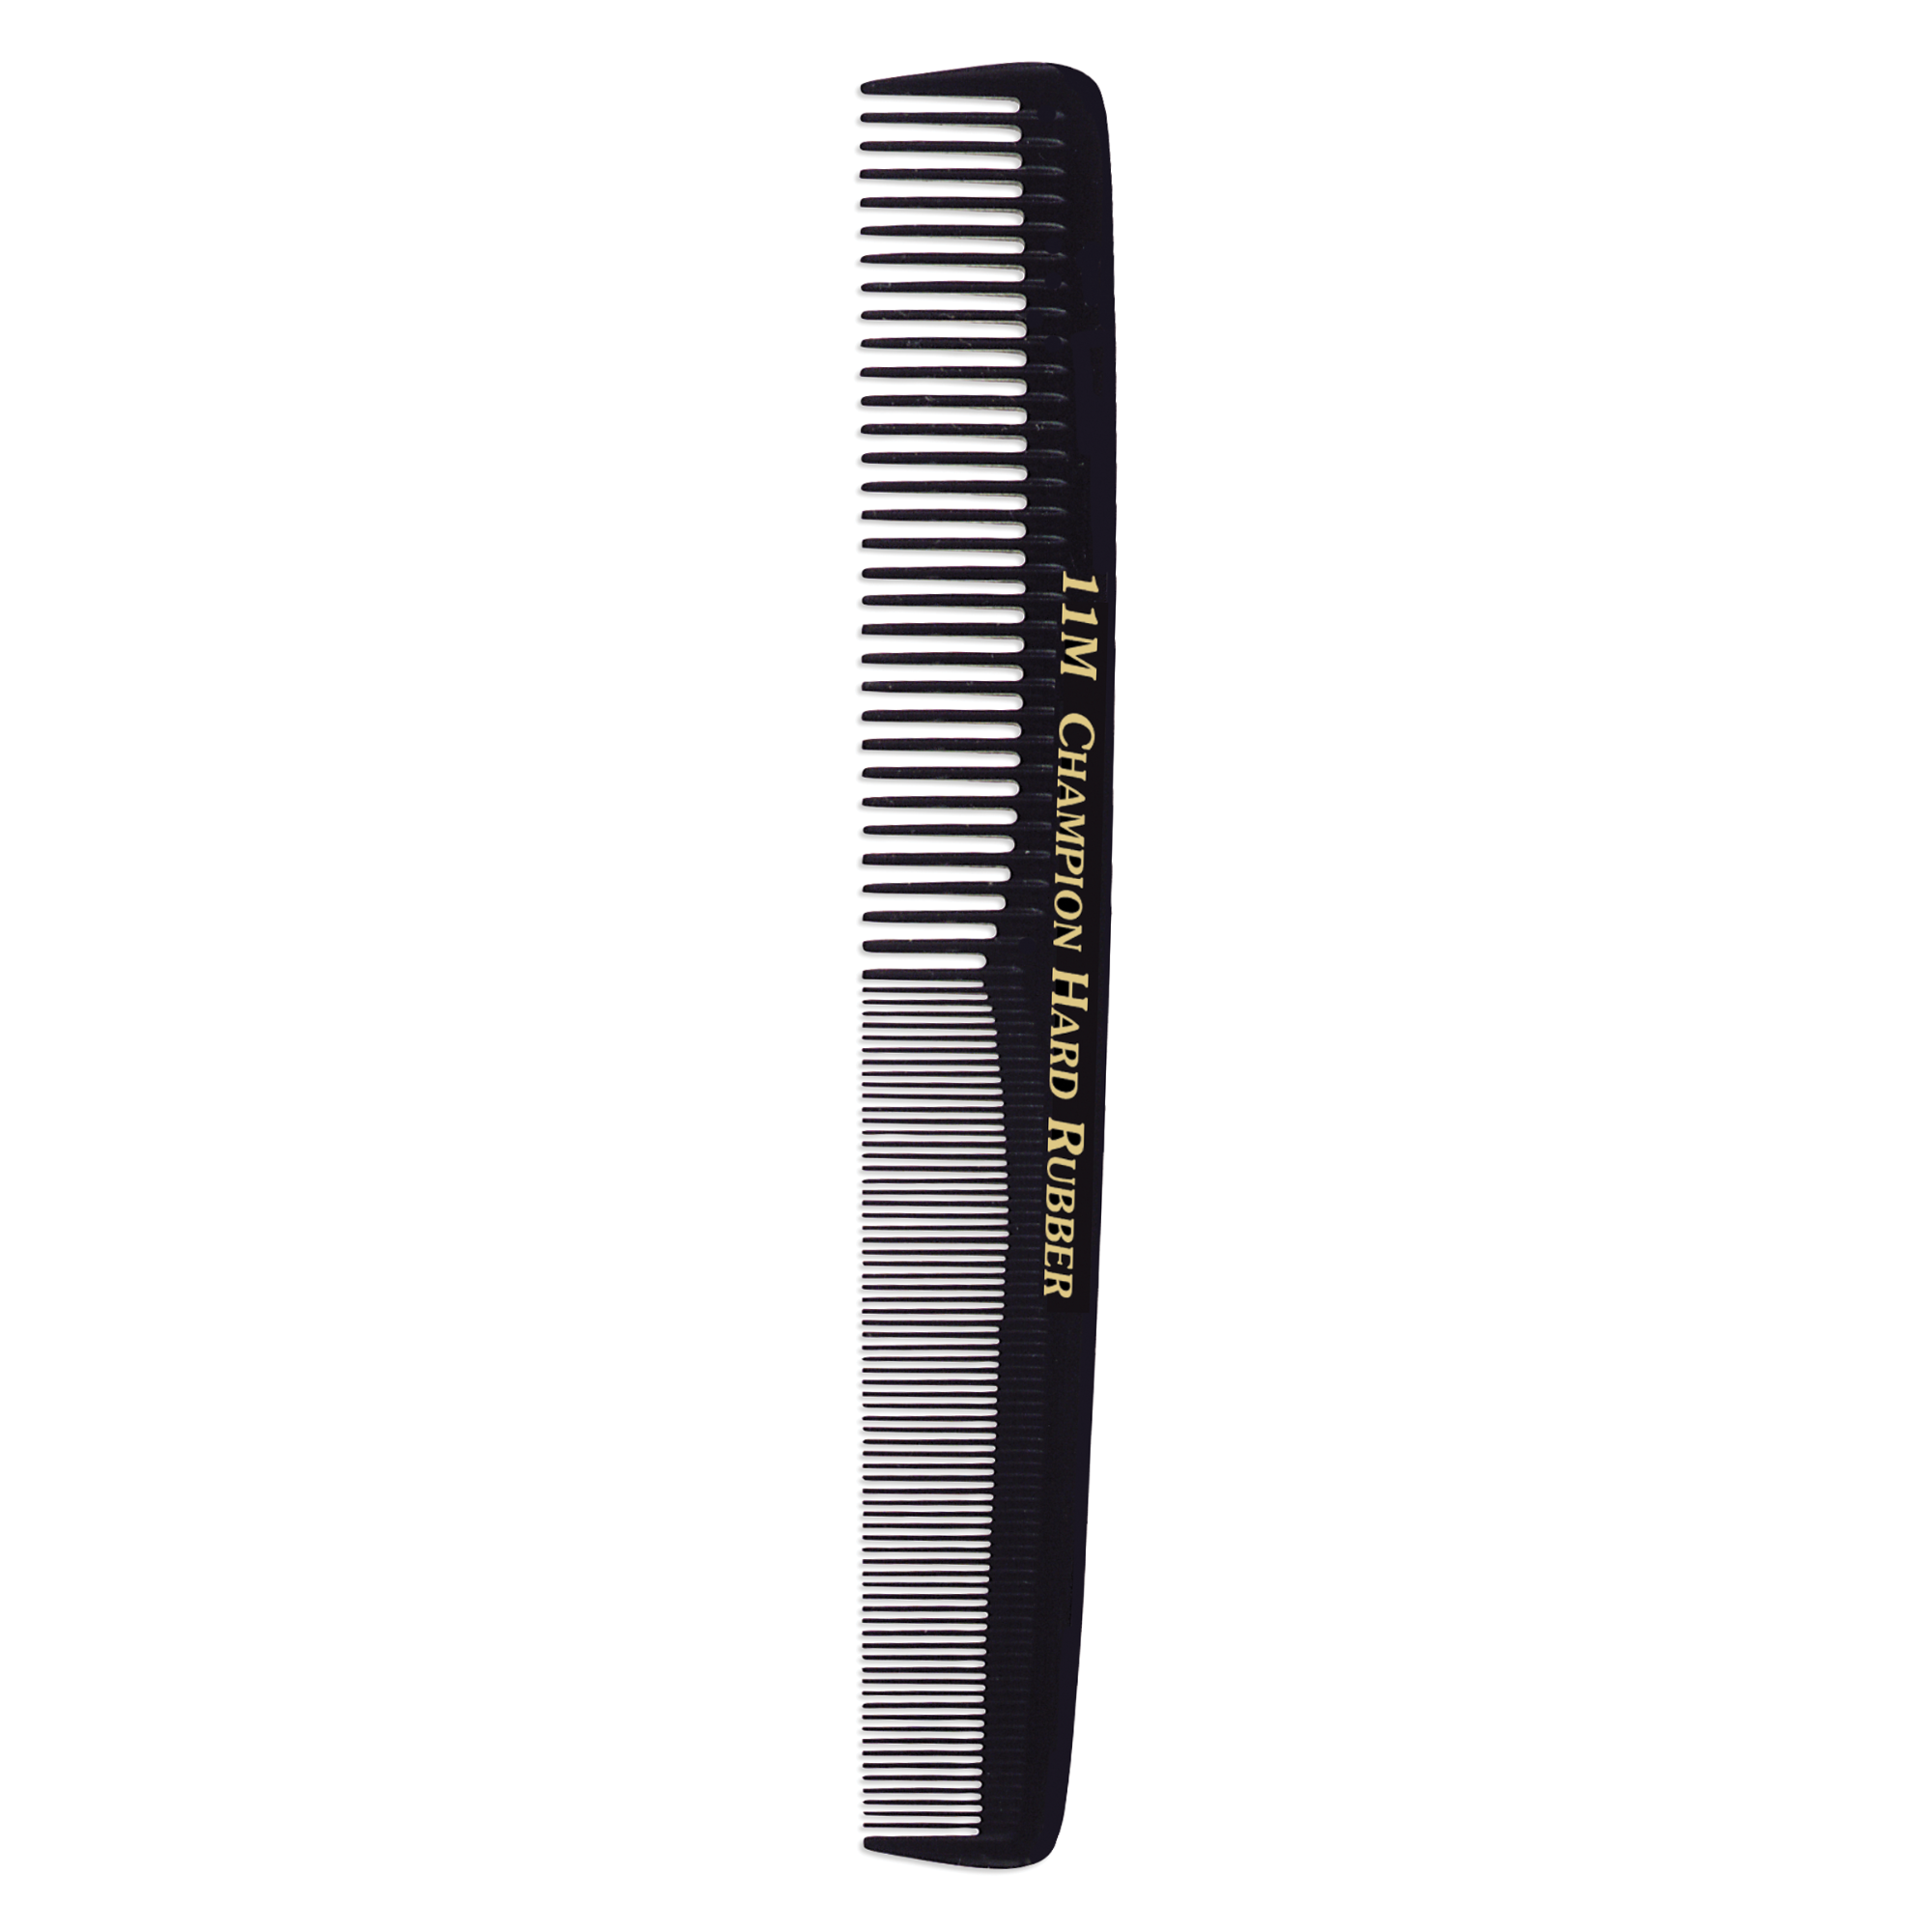 Hard Rubber Styling Comb with Measurements - 7"